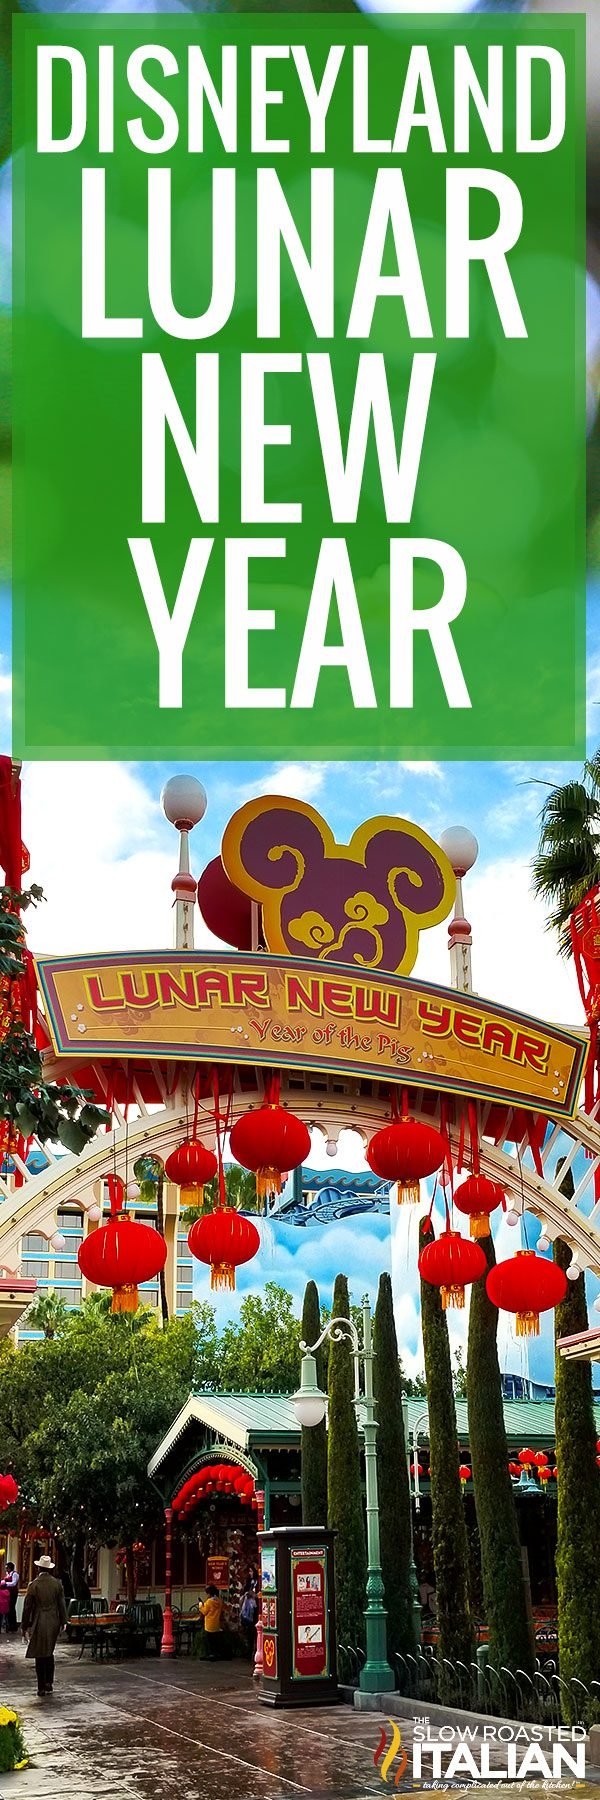 titled collage for lunar new year celebration